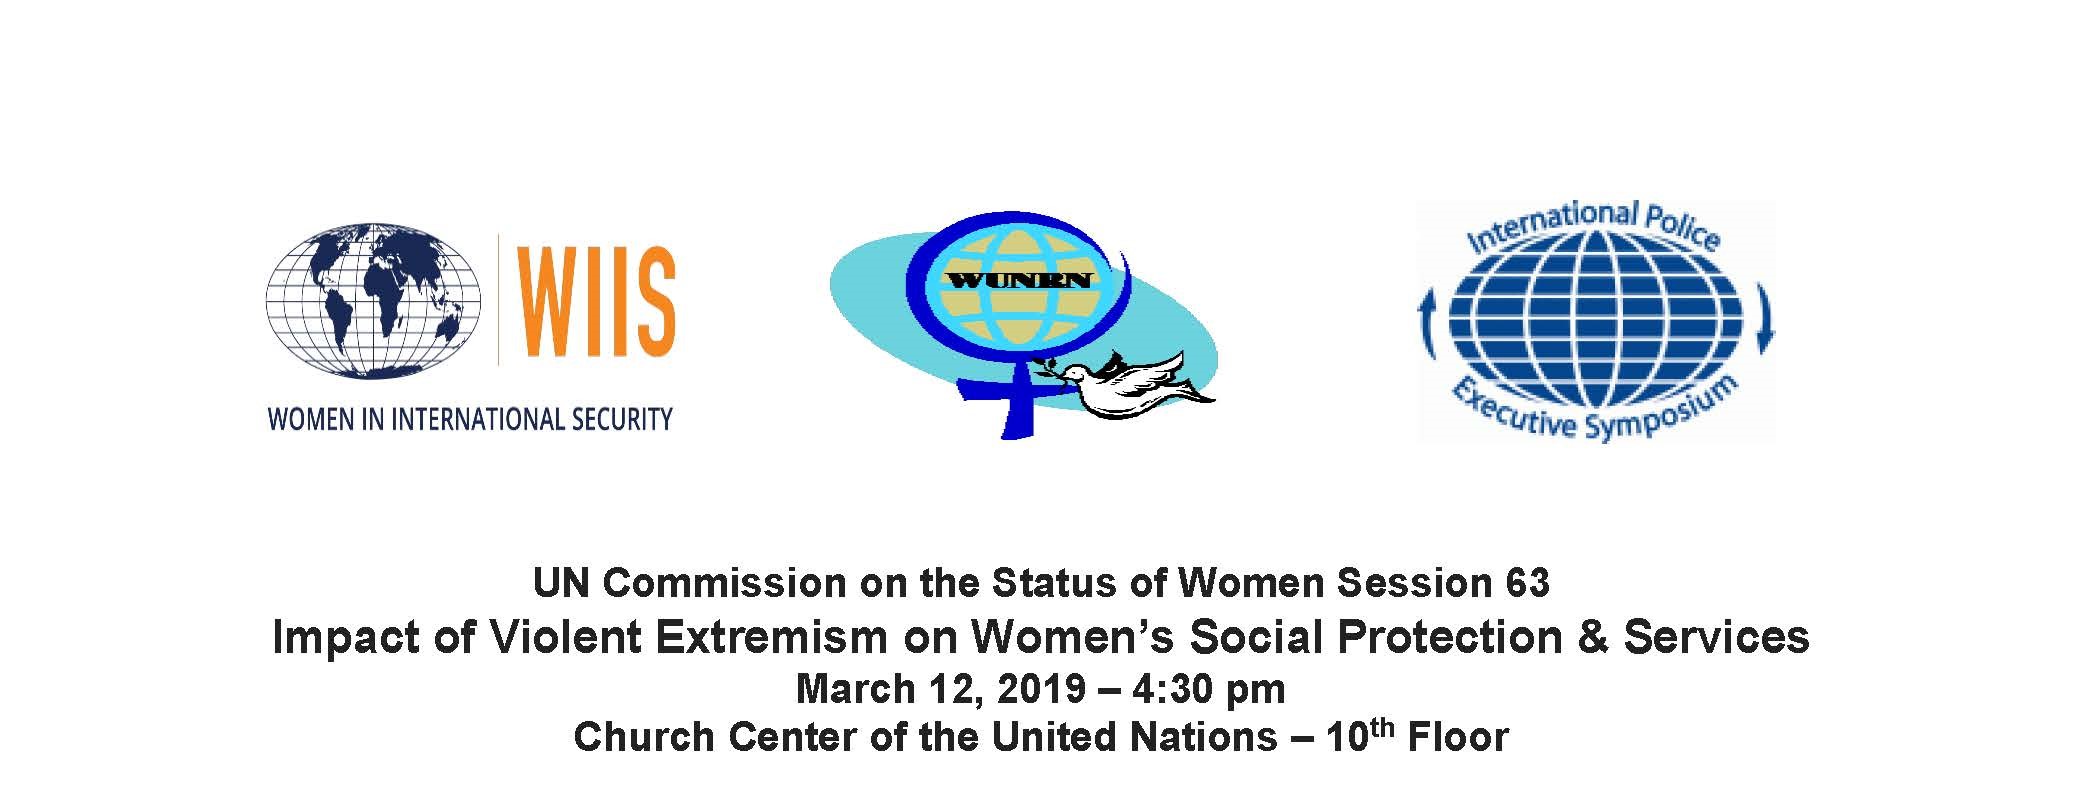 UN Commission on the Status of Women Session 63: Impact of Extremism on Women’s Social Protection & Services